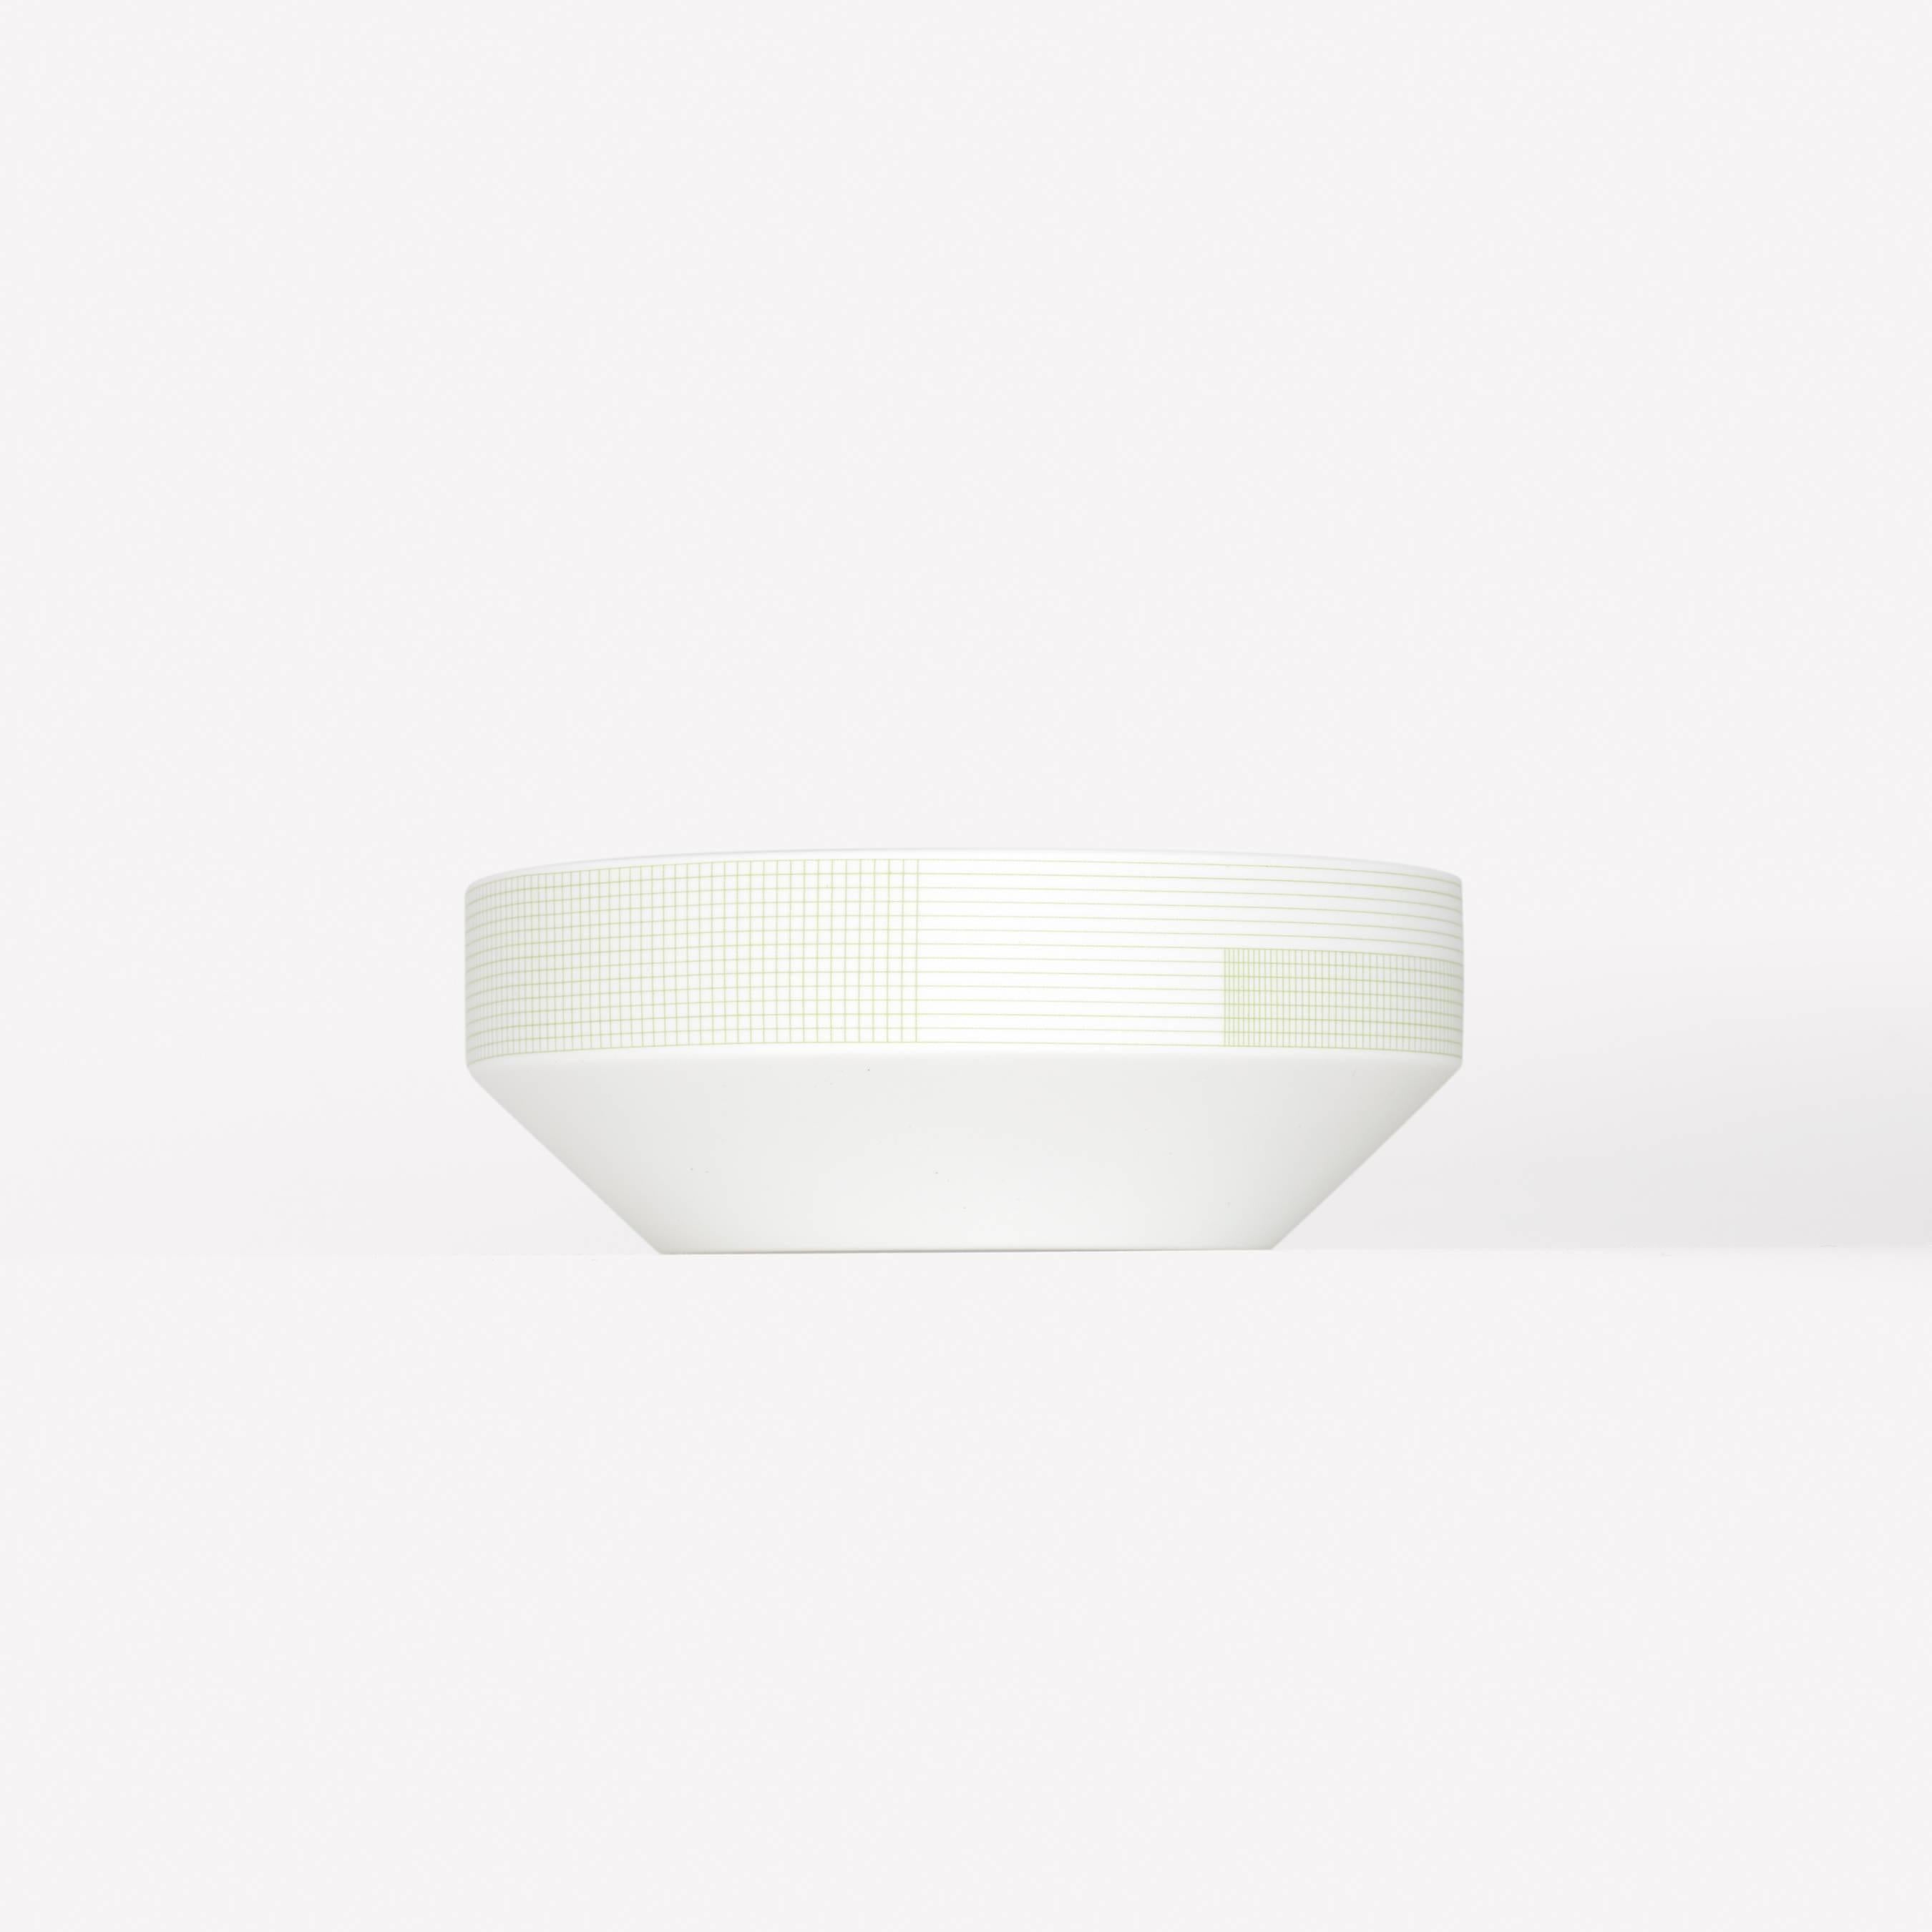 Pattern Porcelain Bowl by Scholten & Baijings
001 Matcha

Porcelain with Grid textile graphic. Matte exterior with gloss interior. Made in Japan by 1616 / arita japan. 

Dishwasher safe.

Scholten & Baijings for Maharam is a collection of home goods